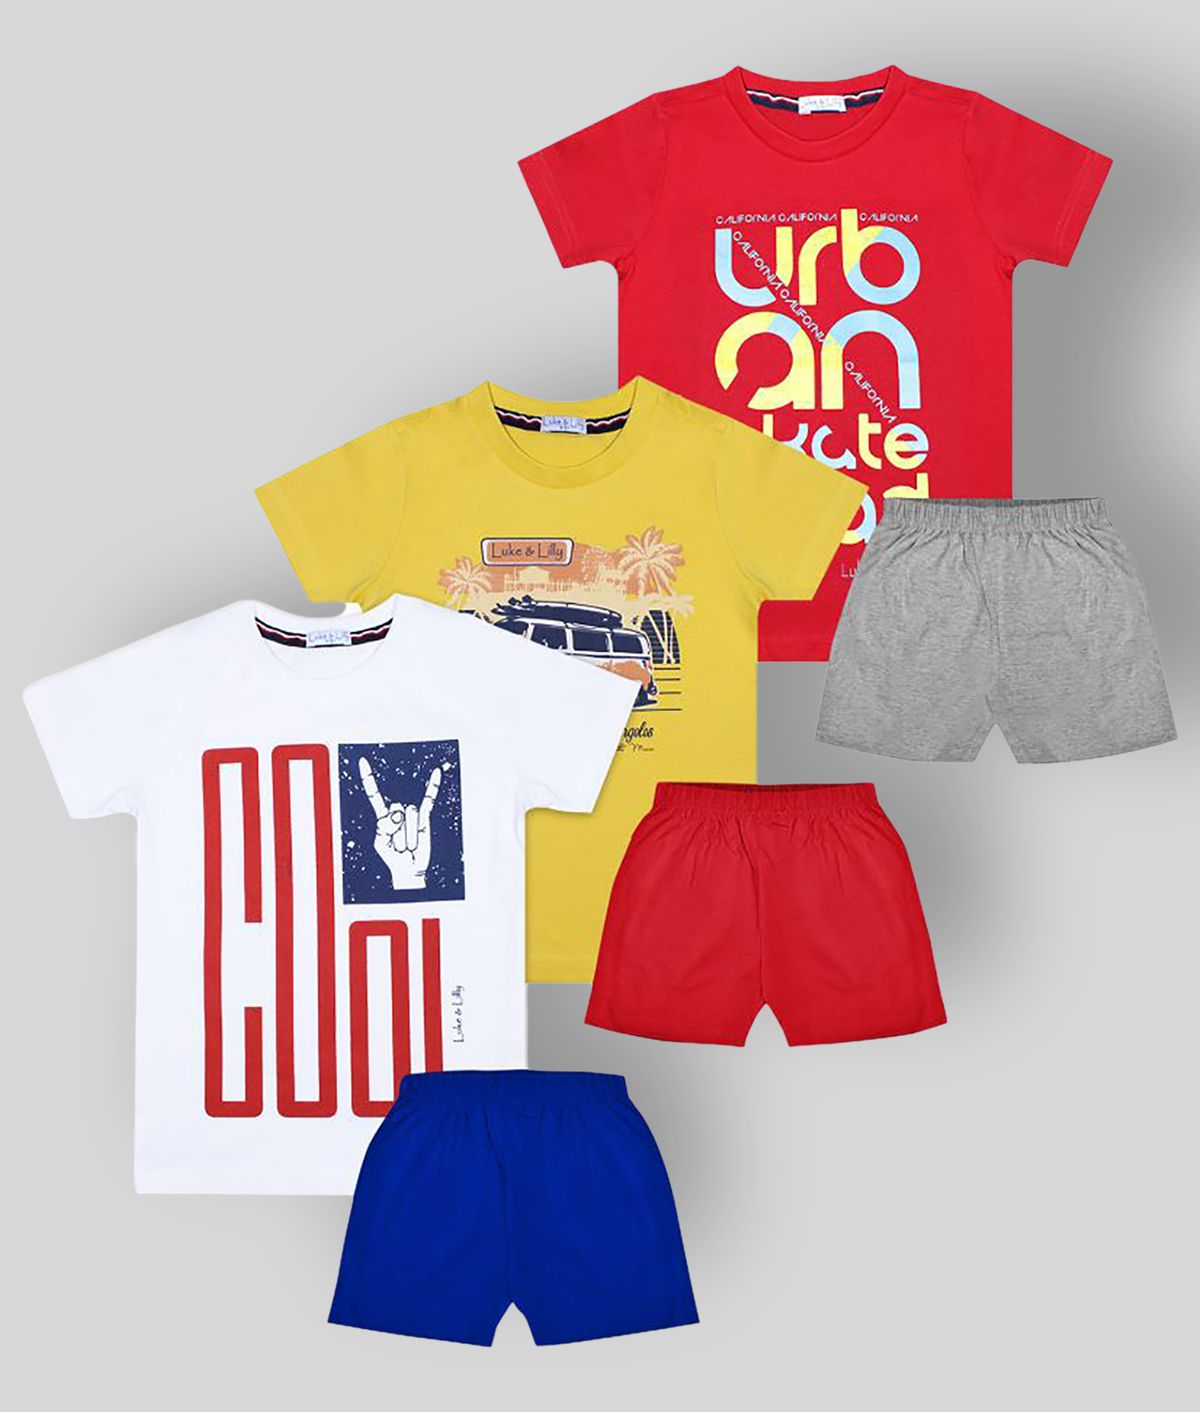 Luke and Lilly - Multi Cotton Blend Boy's T-Shirt & Shorts ( Pack of 3 )